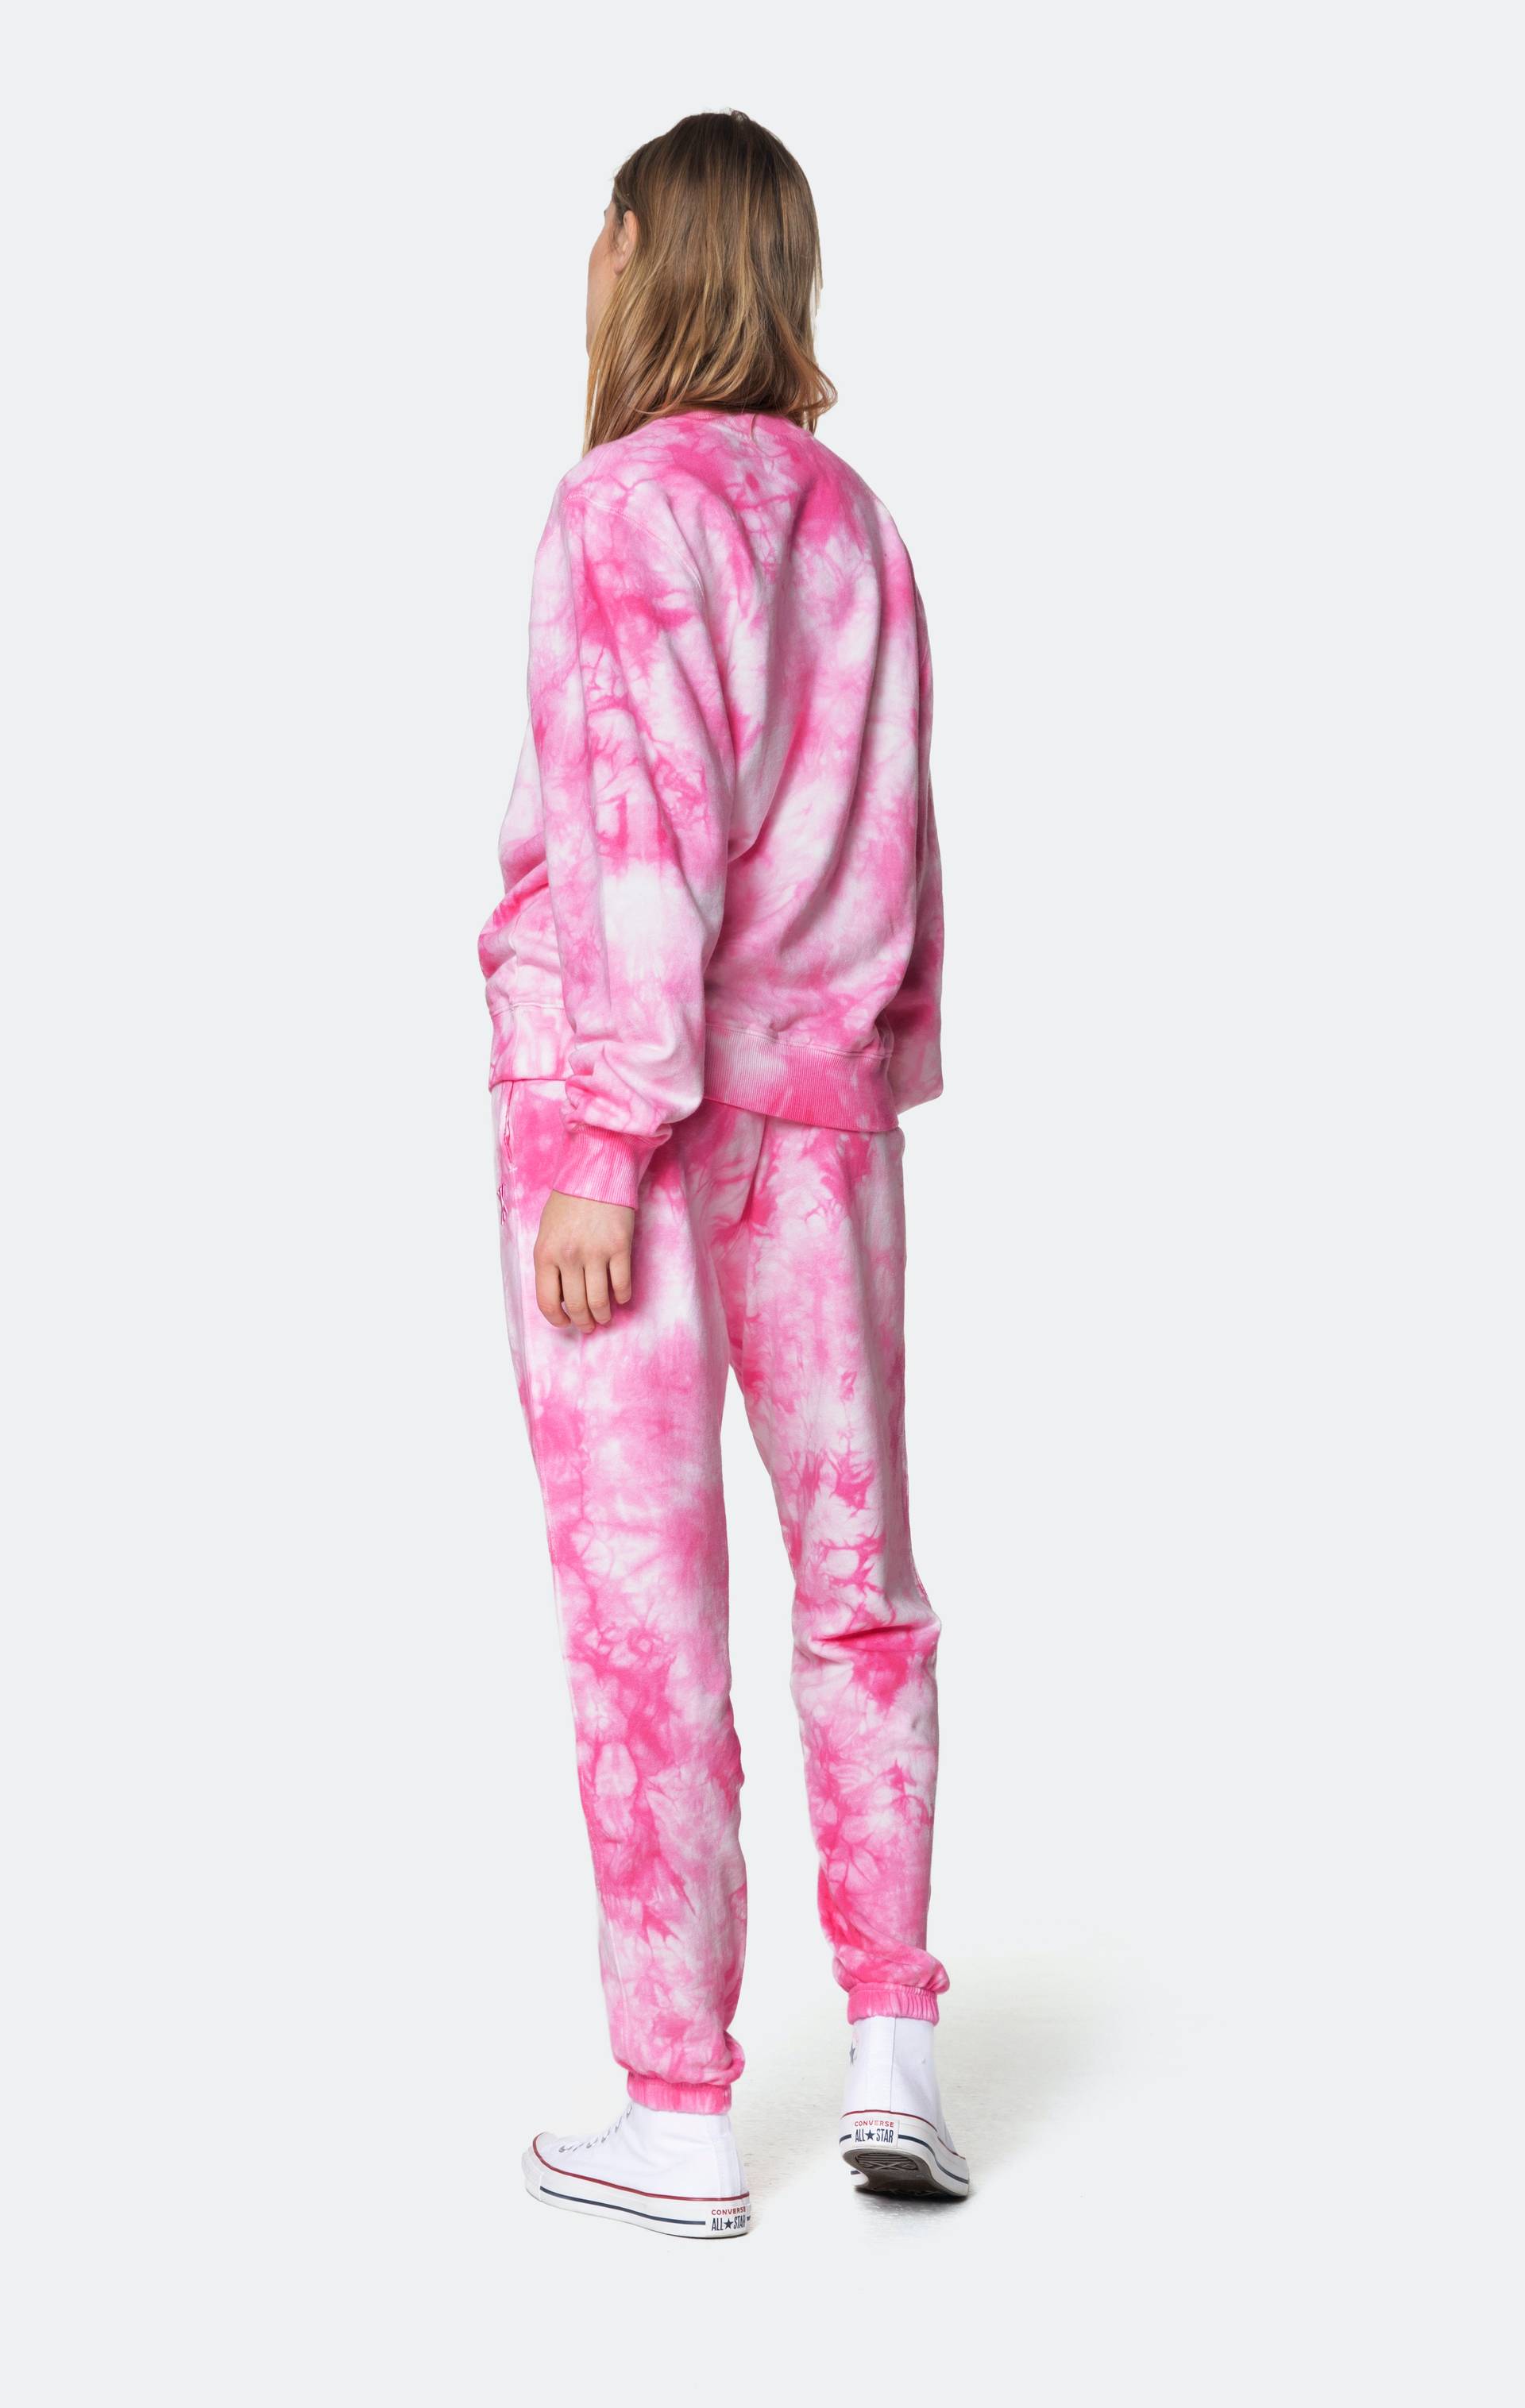 Onepiece Tie Dye Pant Pink - 9